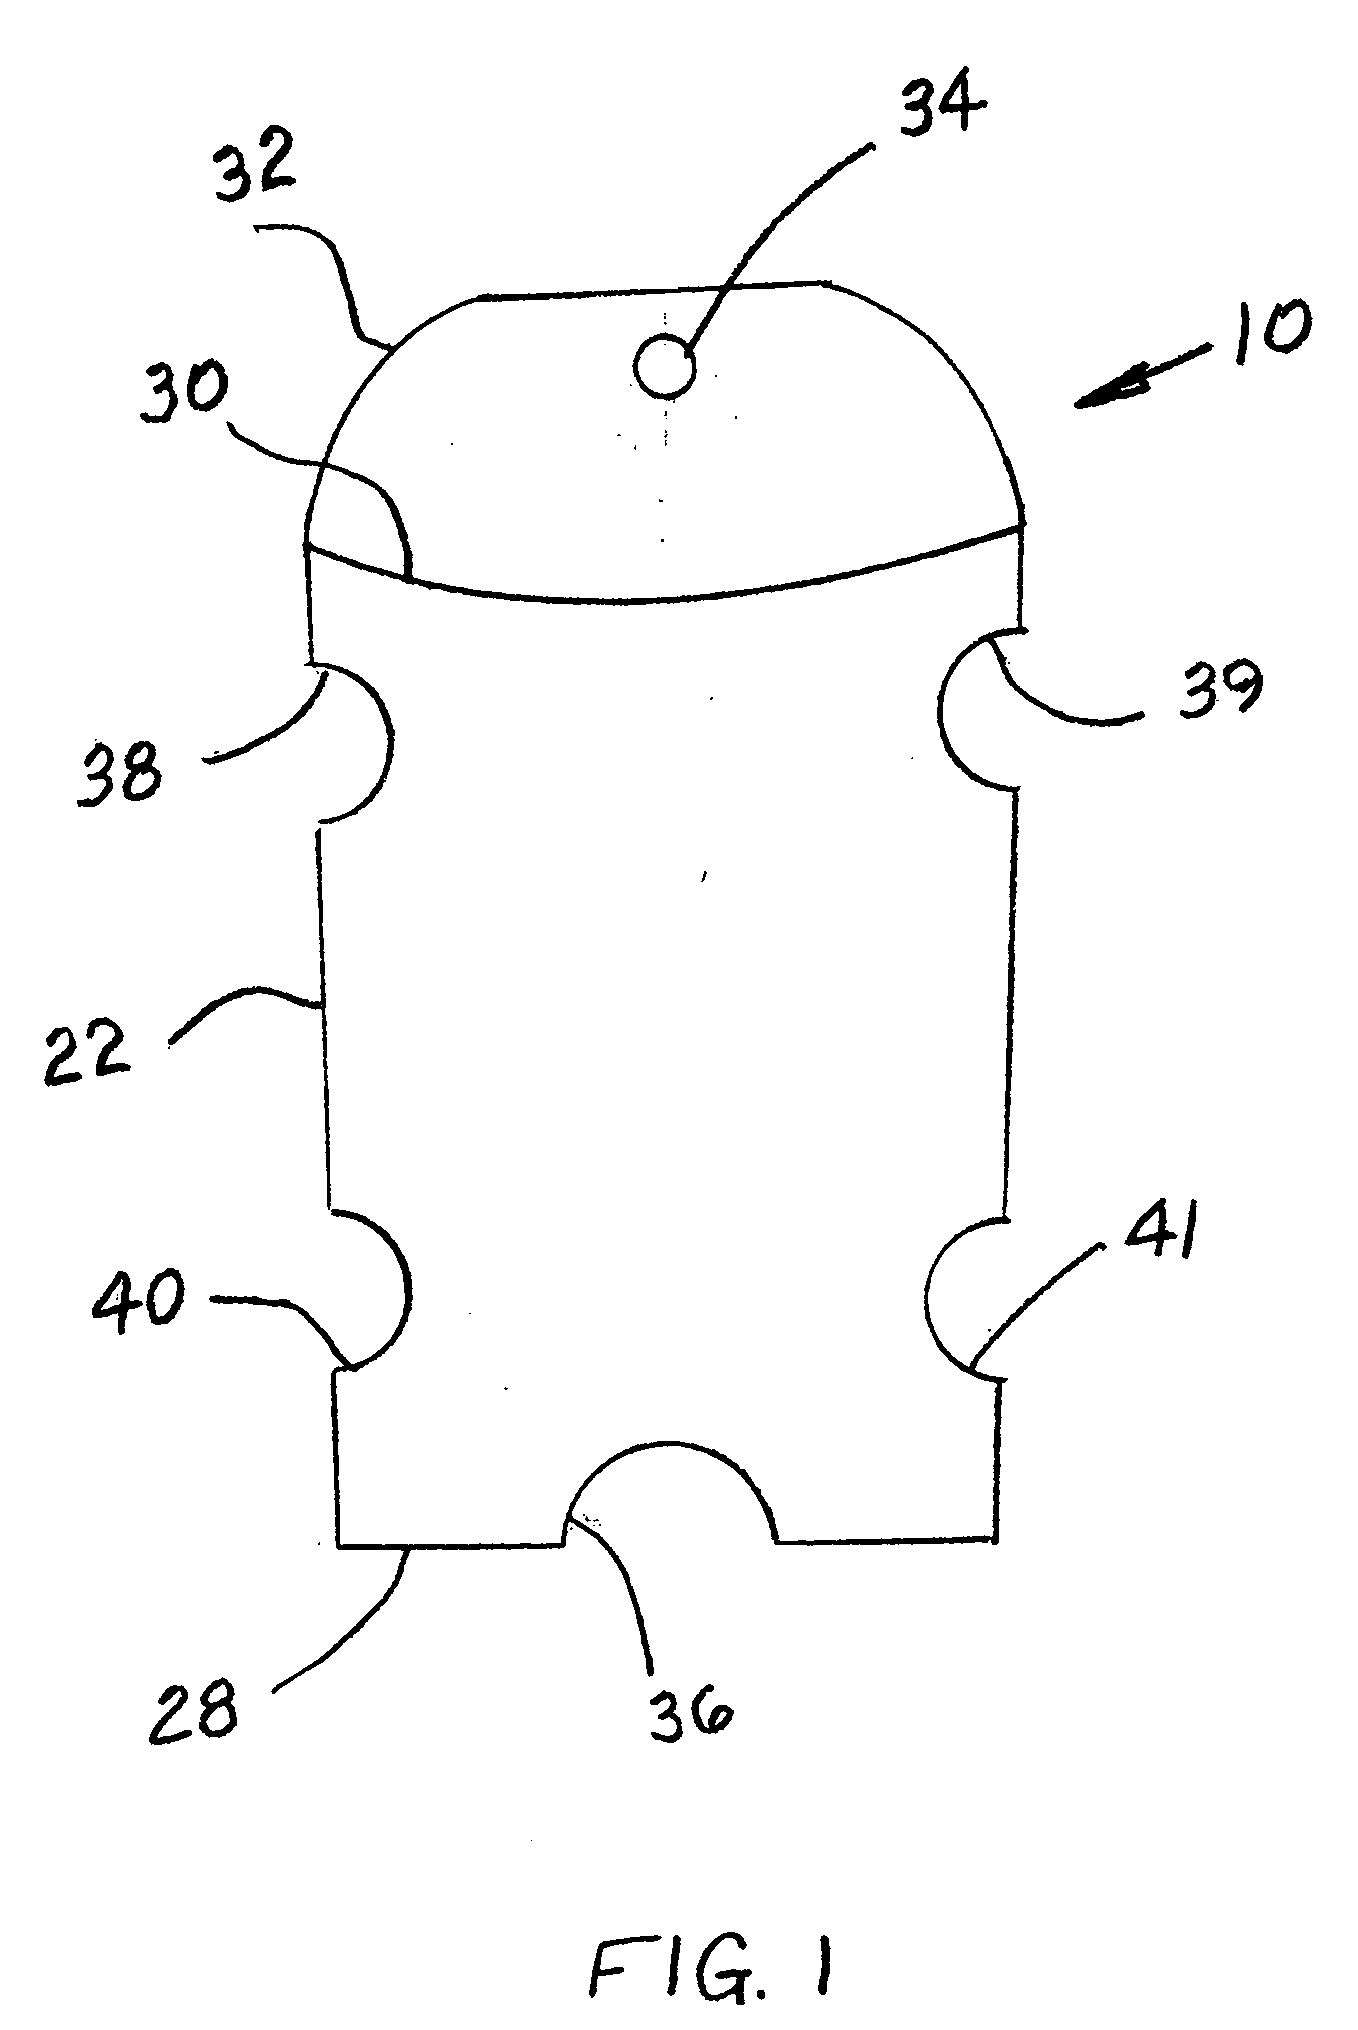 Urine collection bag supporting device